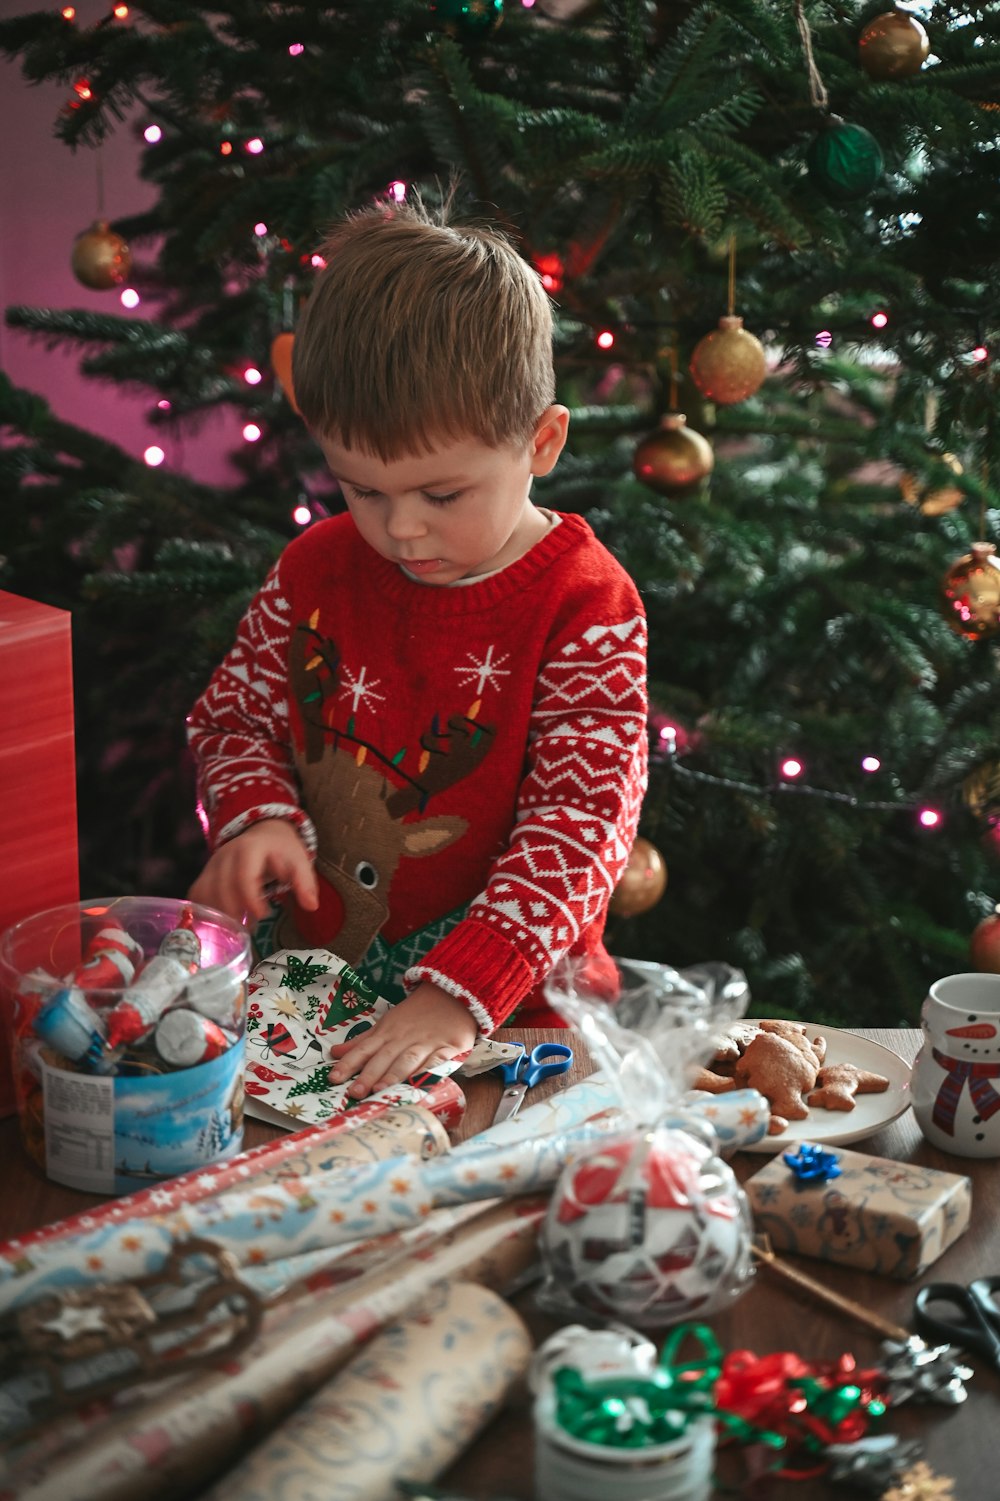 a young boy in a red sweater is decorating a christmas tree